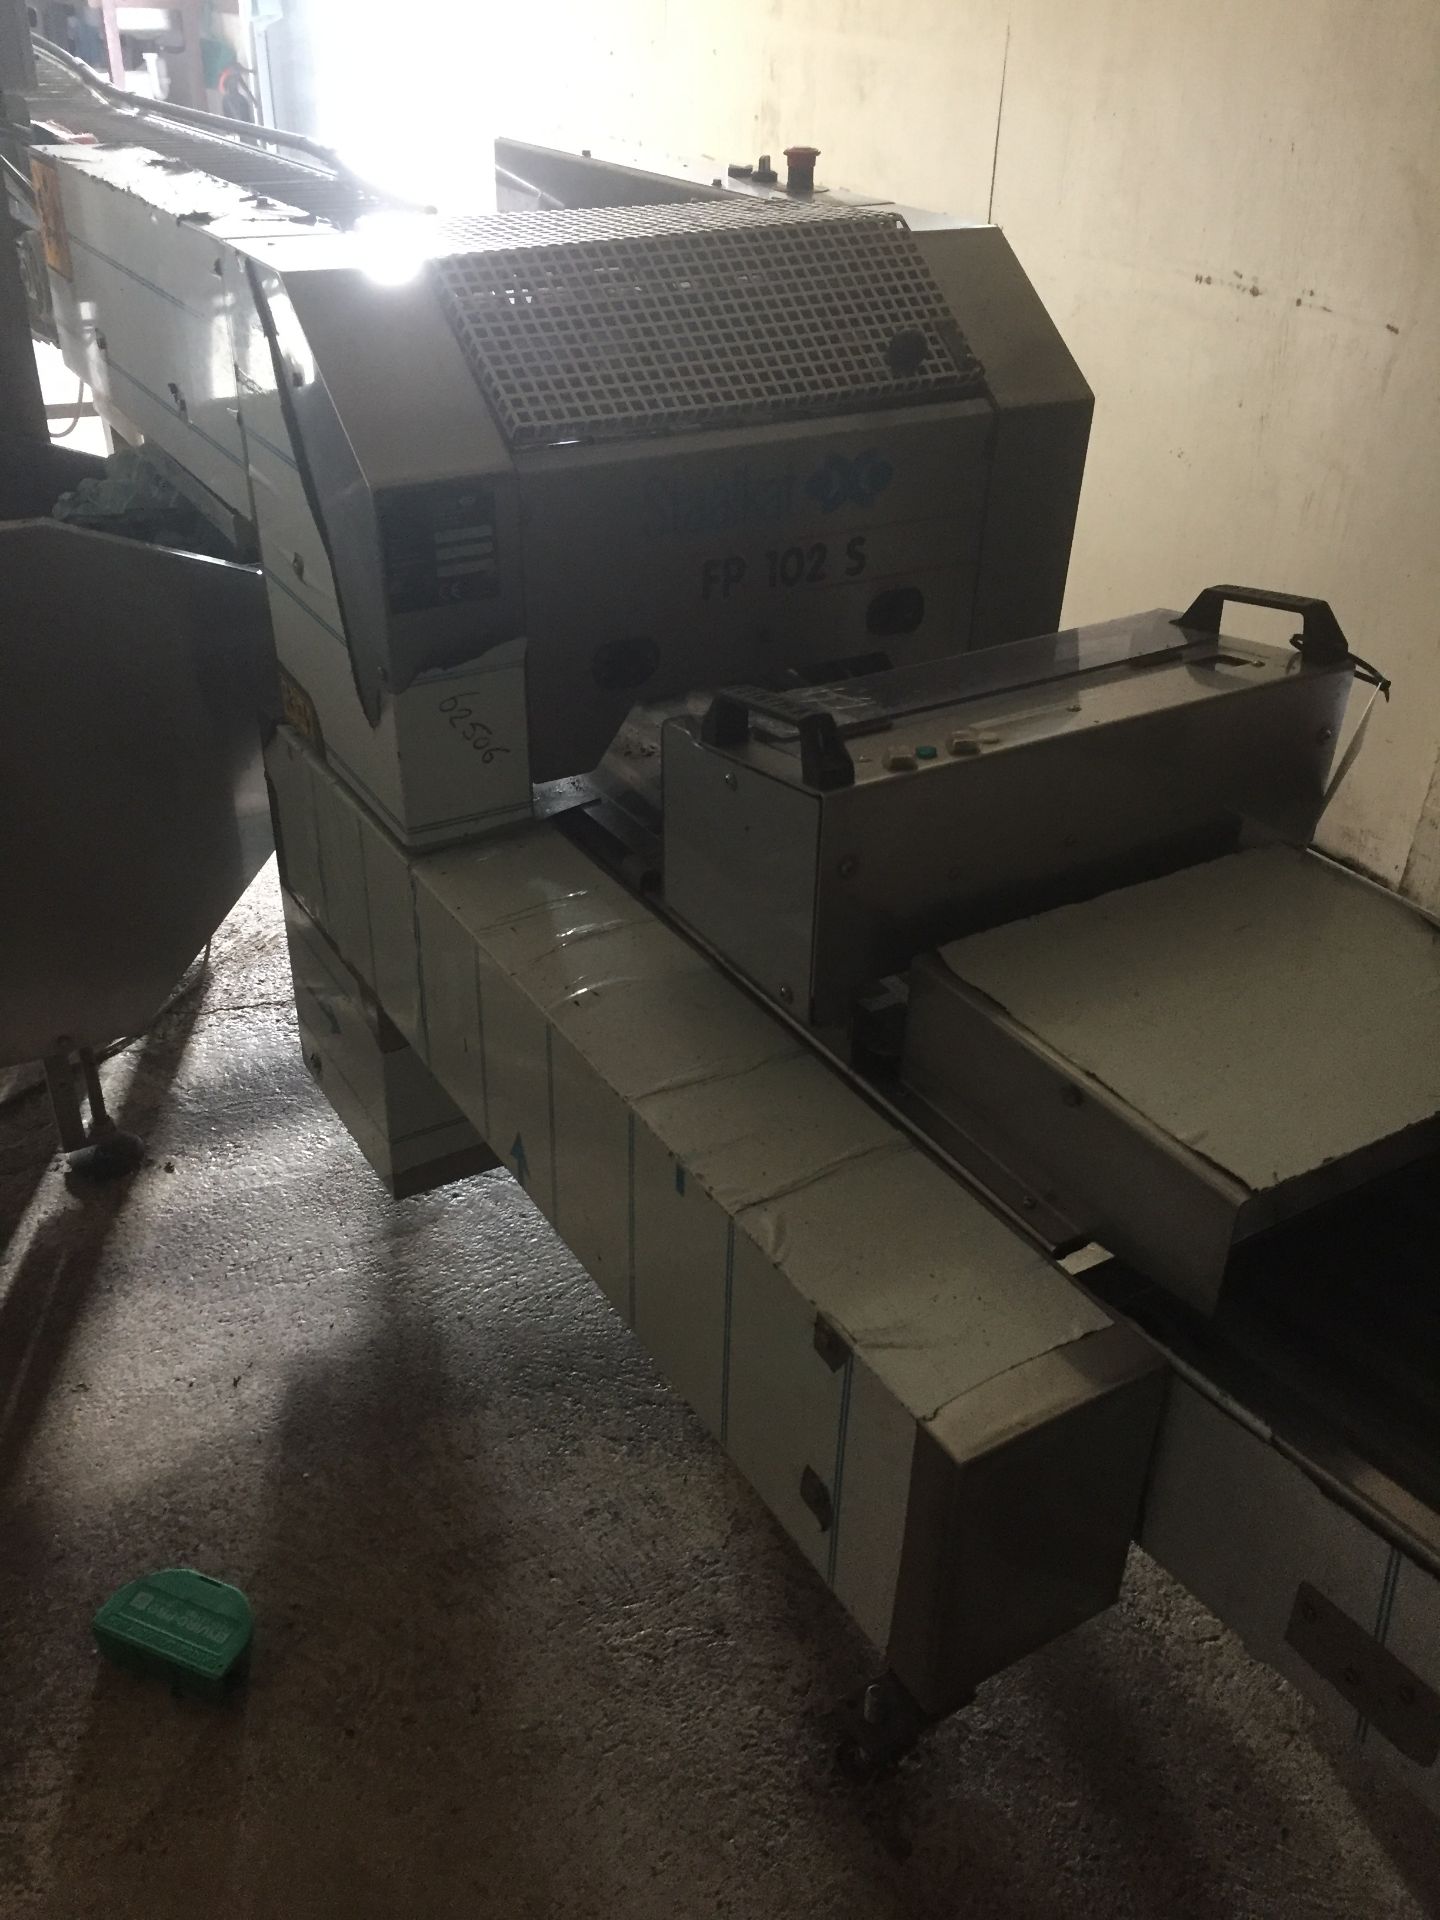 Staalkat FP 102S 5 lane egg packing machine, Serial No. 2125 (2005) with Hedipack in-line printer - Image 3 of 4